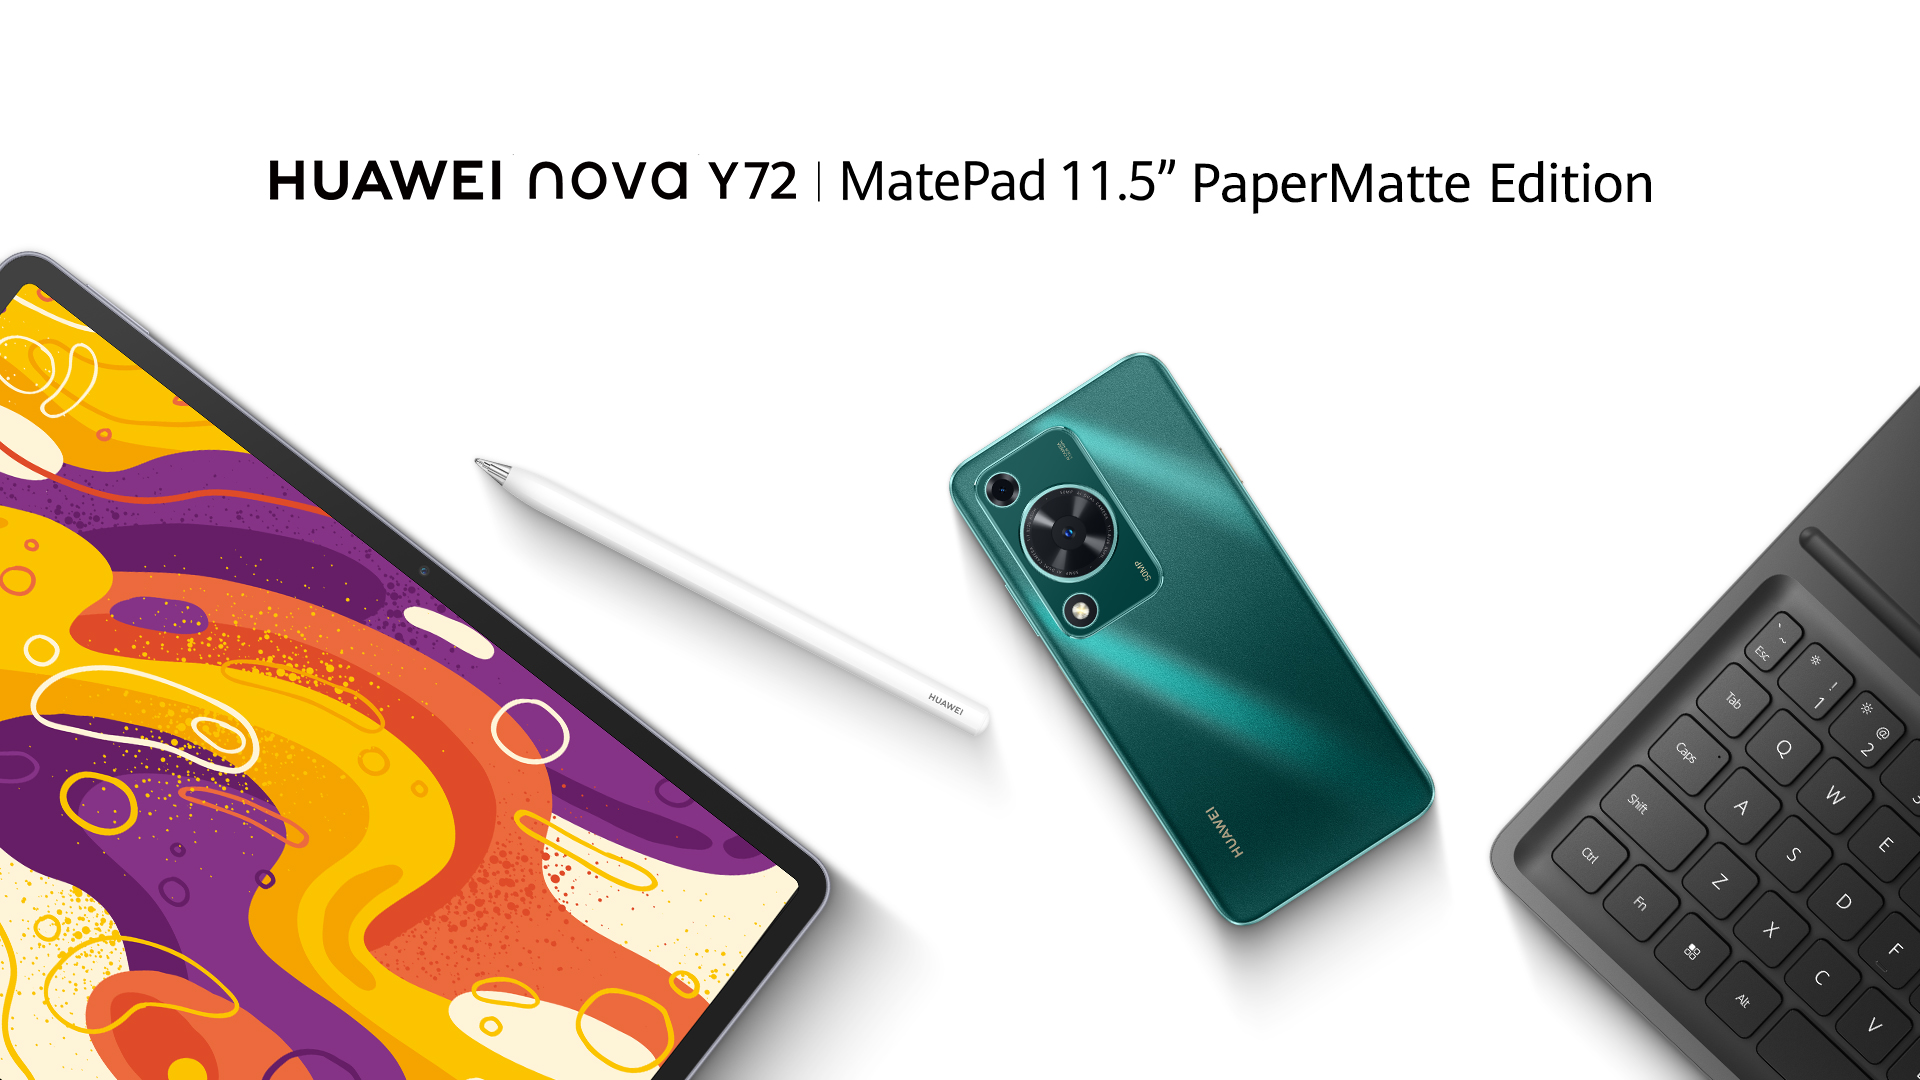 HUAWEI Launches the MatePad 11.5-inch PaperMatte Edition and nova Y72